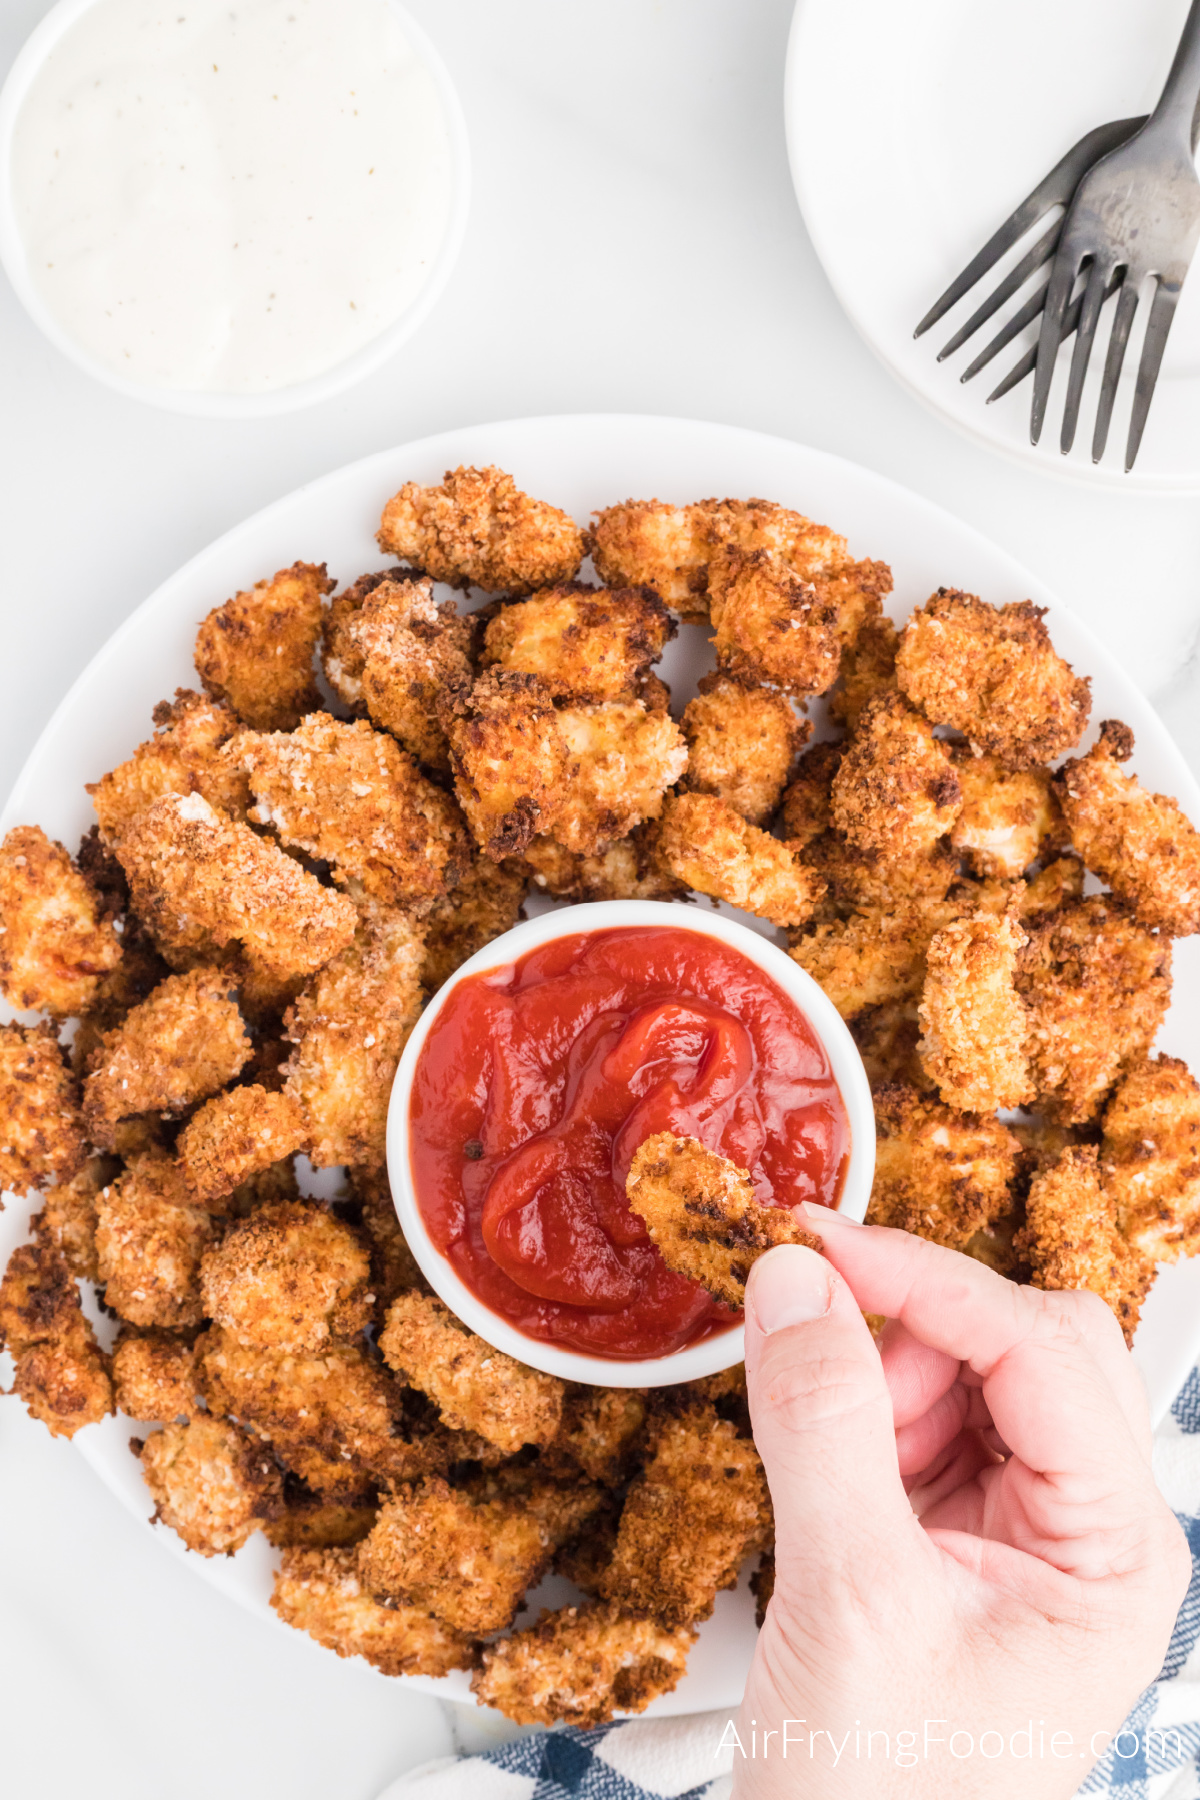 Popcorn chicken on a serving plate, with a hand dipping a pice of chicken into a bowl of ketchup.